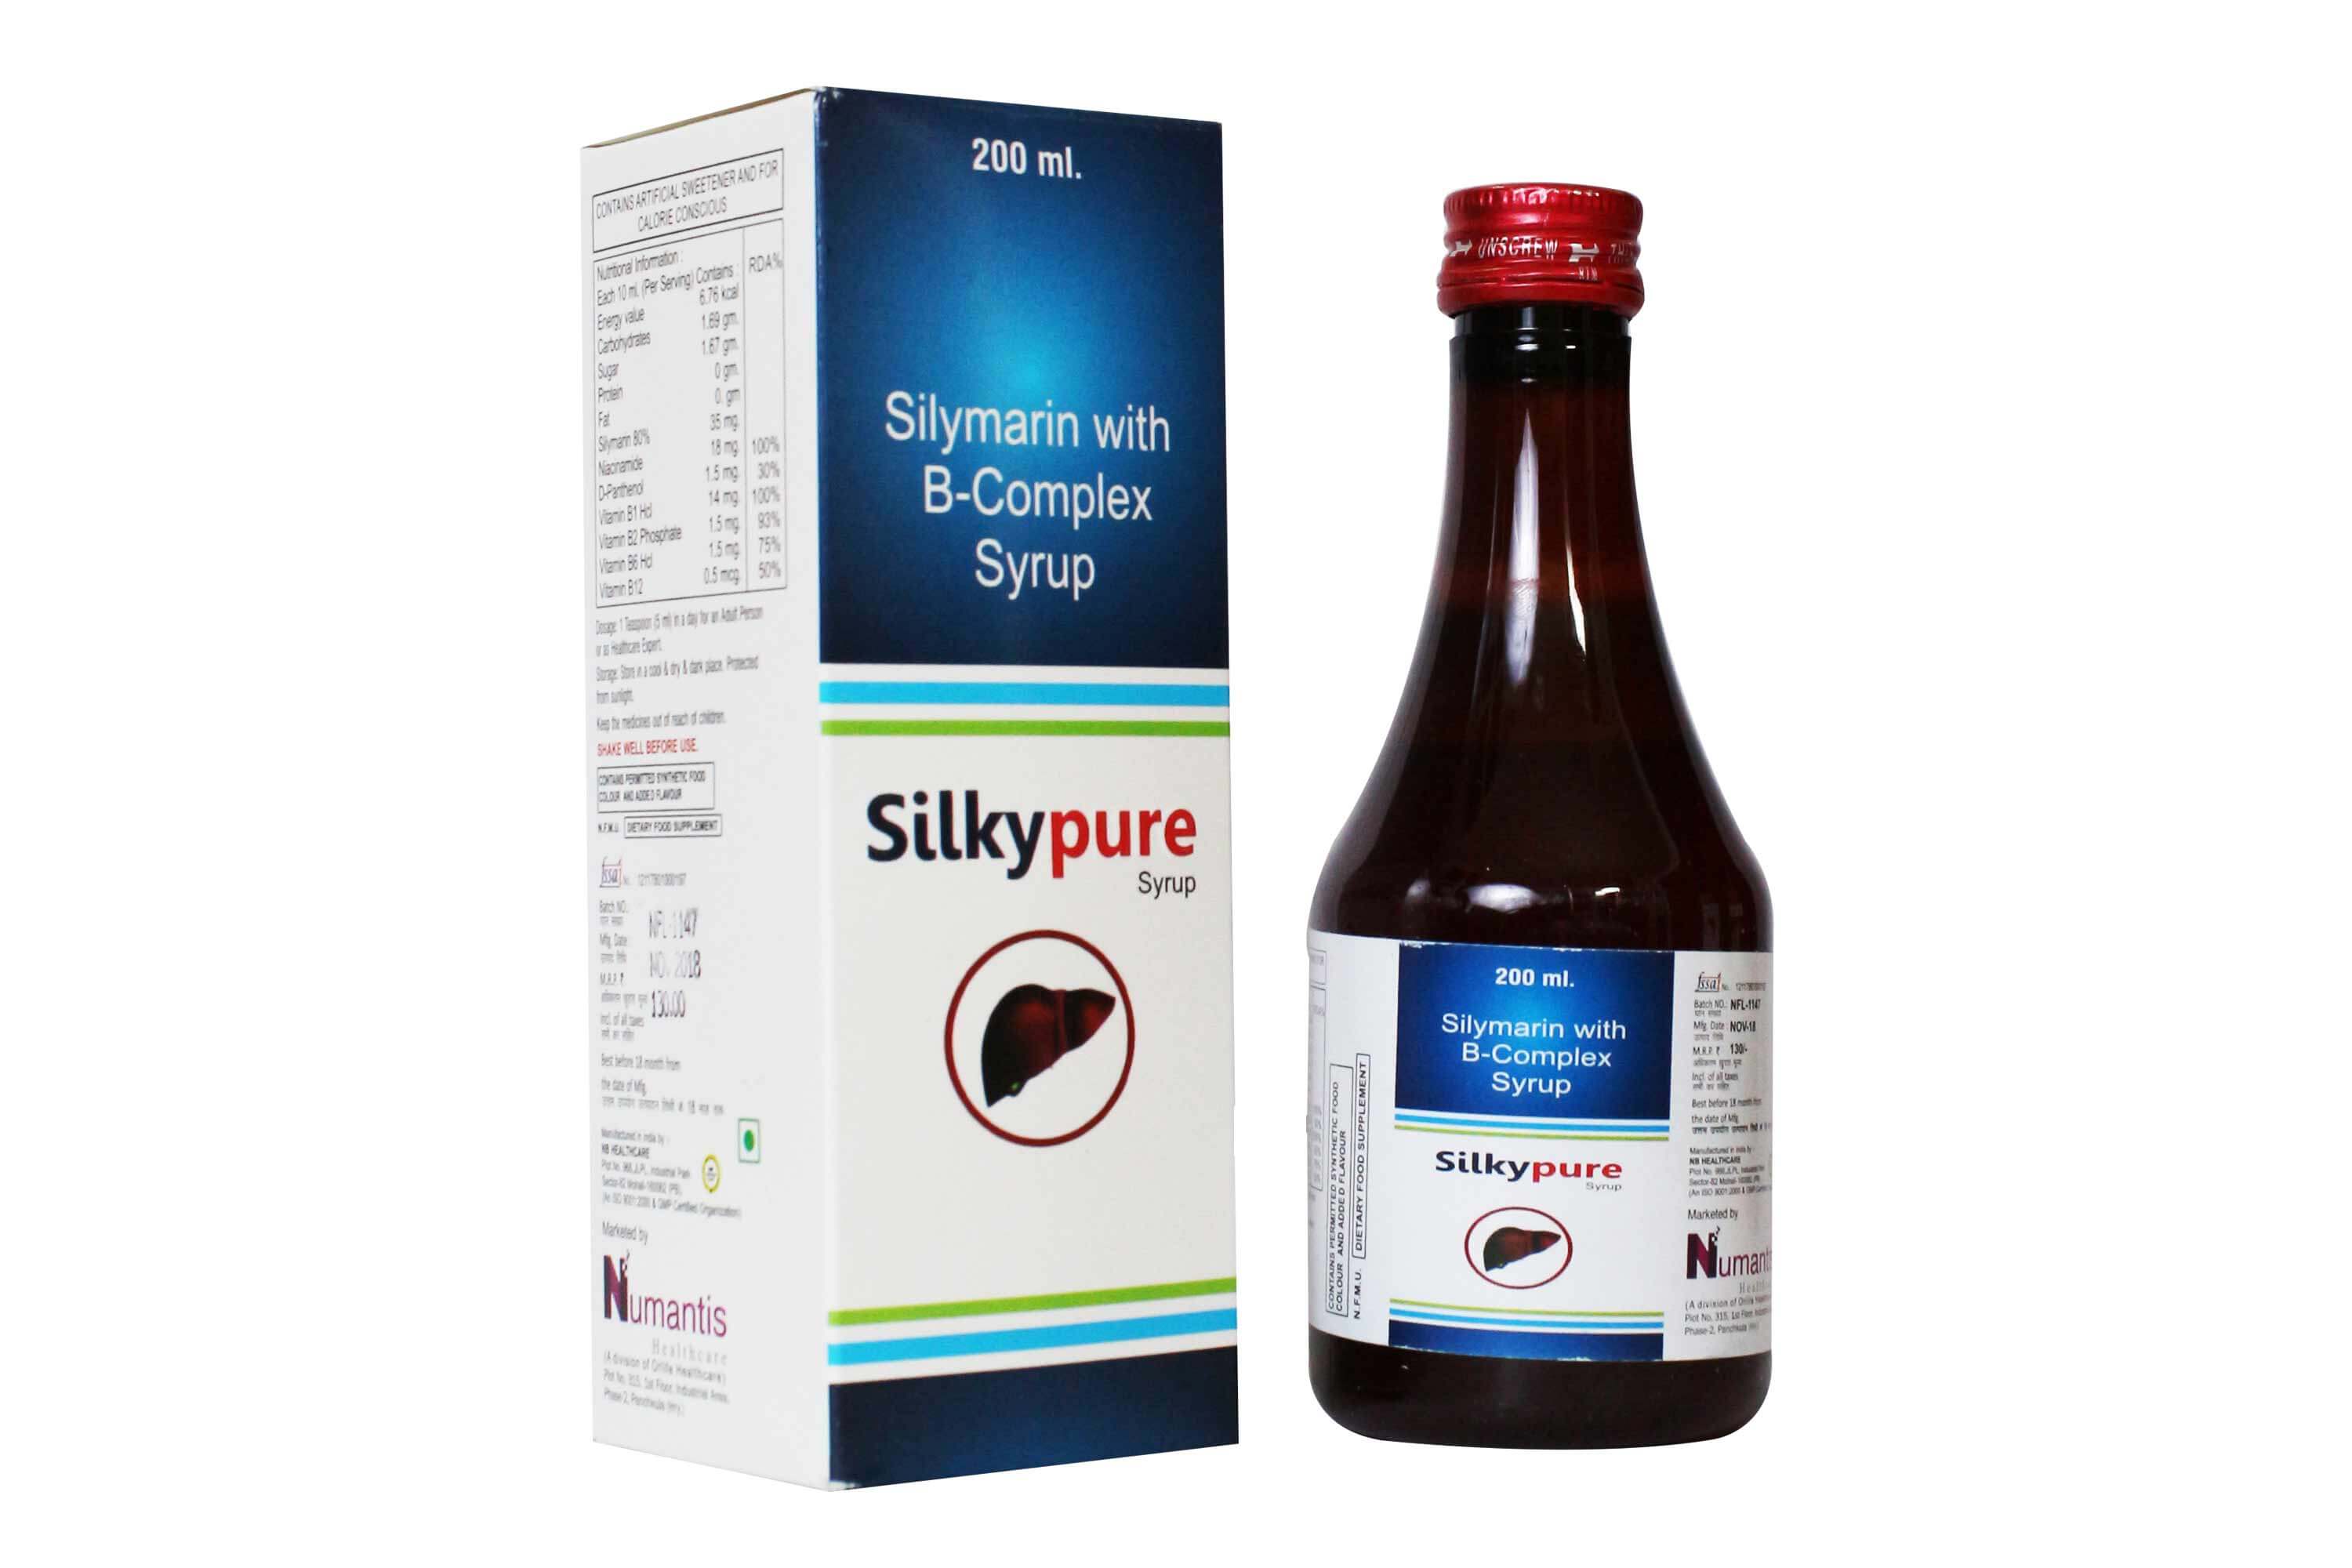 Product Name: Silkypure, Compositions of Silkypure are Silymarin with B-Complex Syrup - Numantis Healthcare